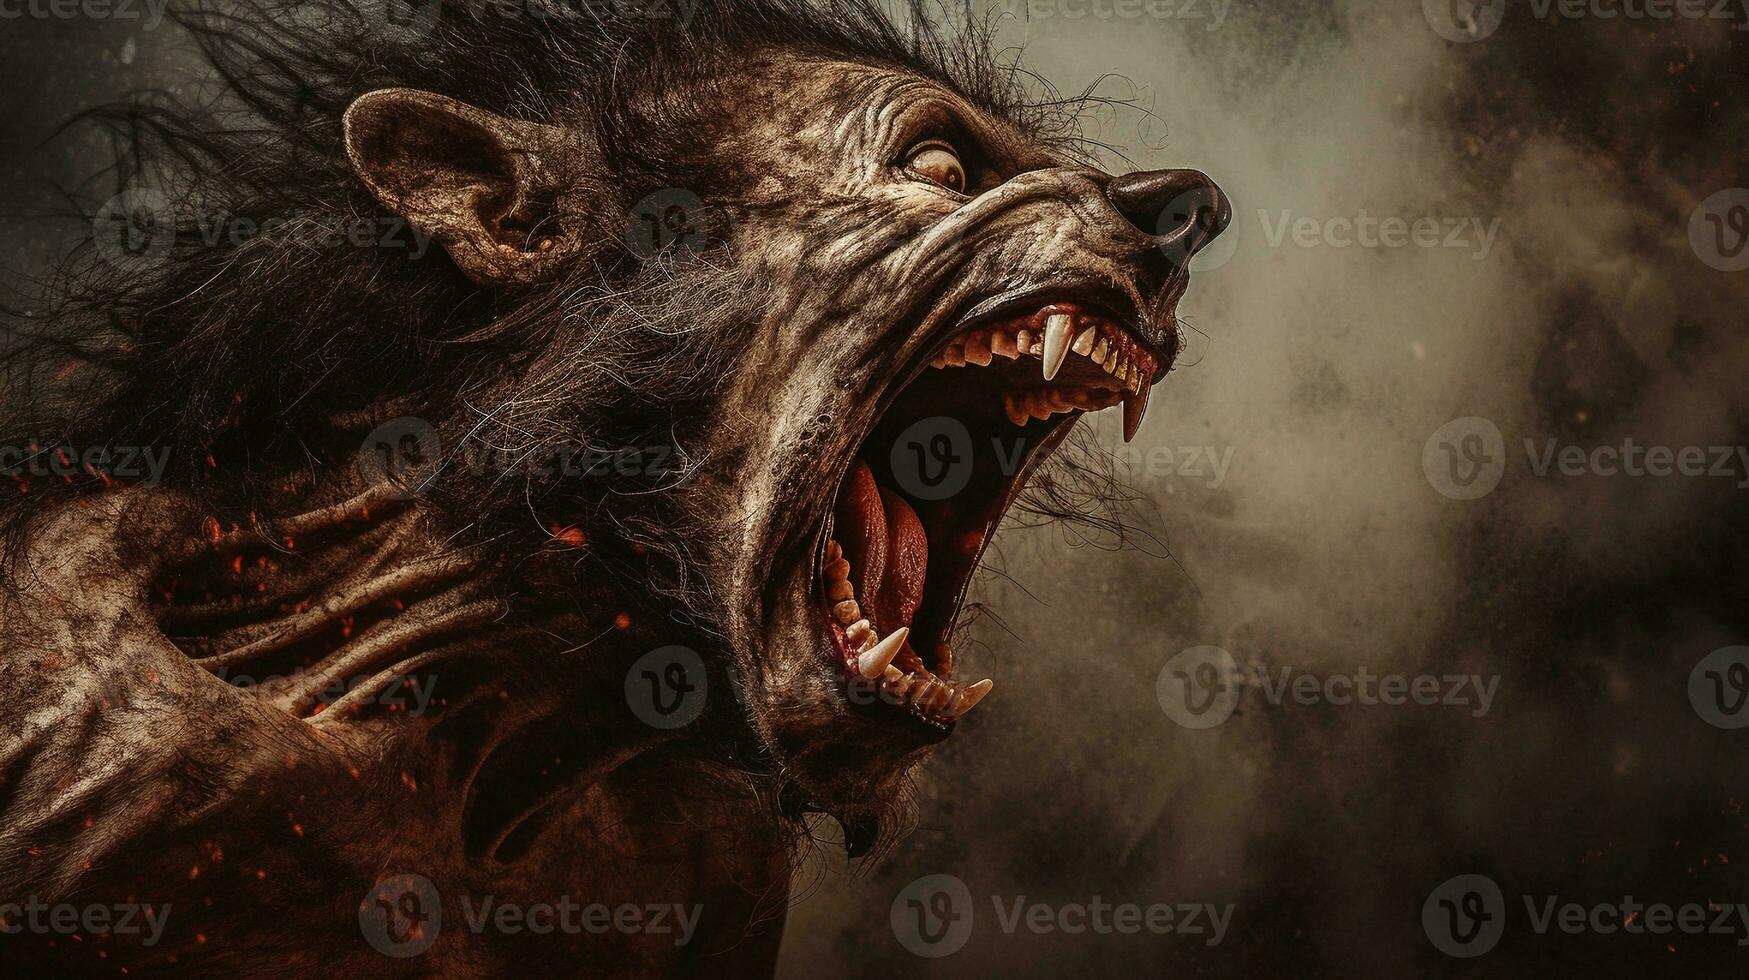 A captivating scene portraying the transformation of a human into a werewolf, a creature from European folklore, against a textured background, background image, AI generated photo